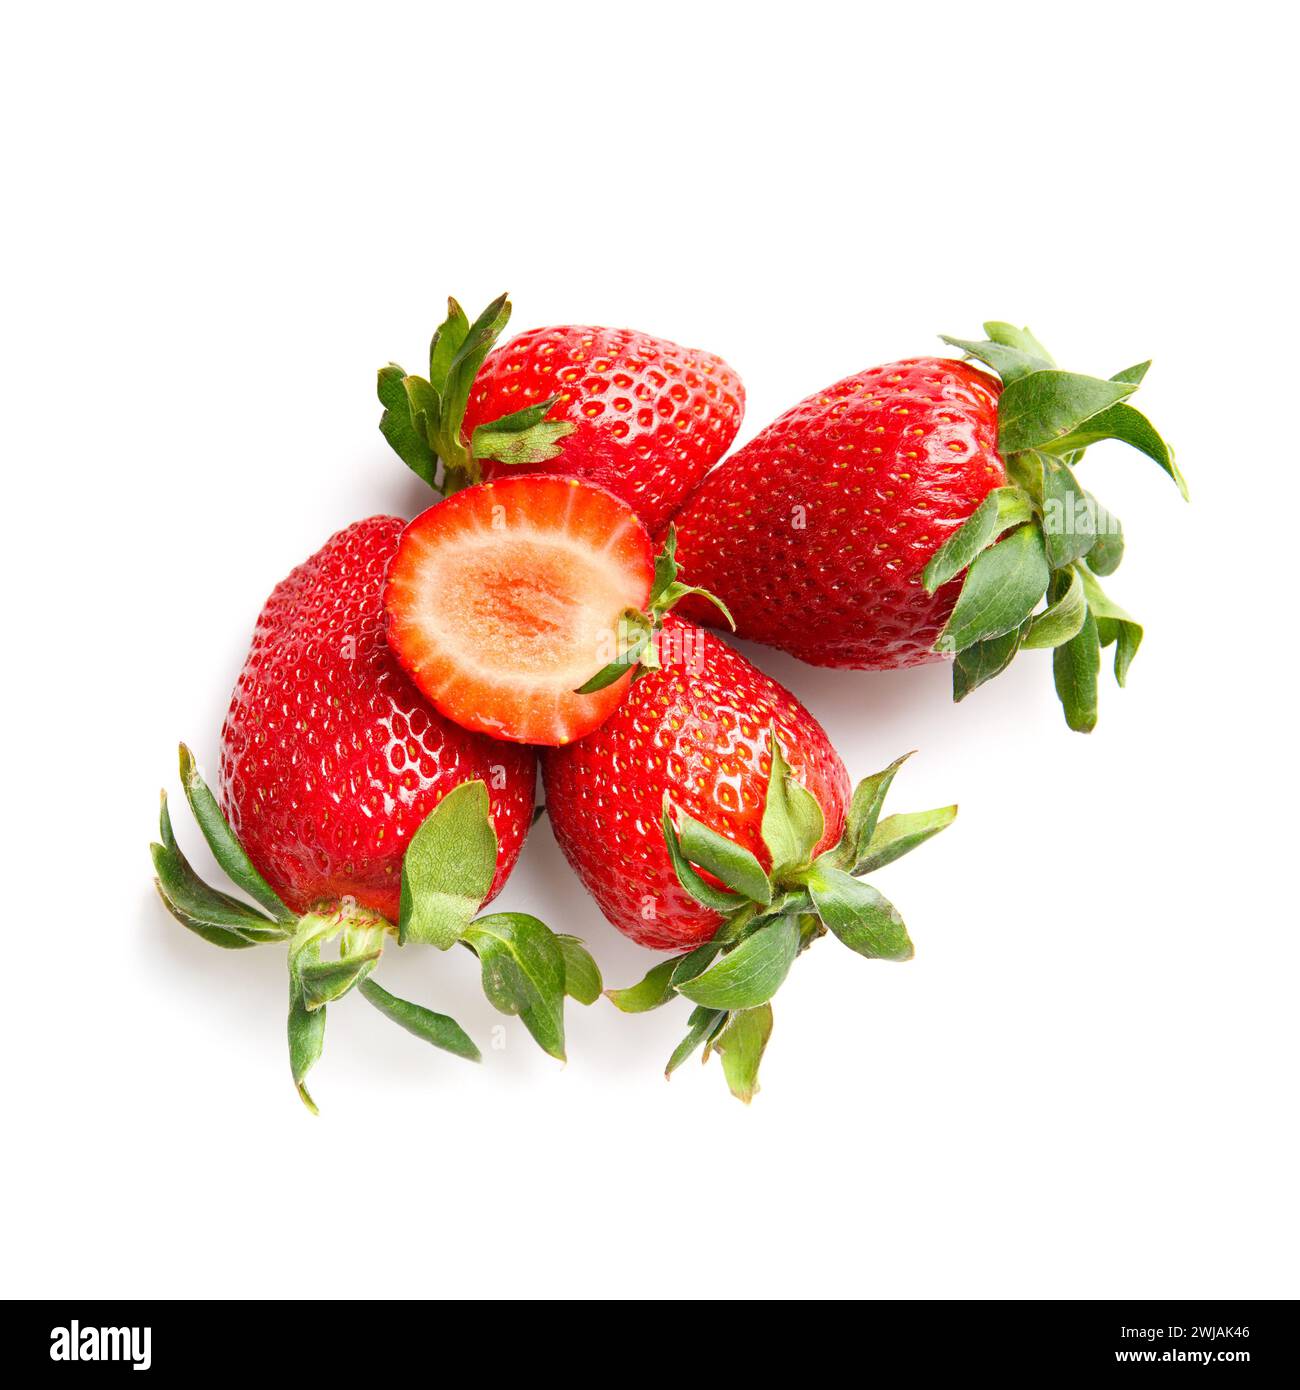 Fresh whole strawberries and half cut strawberries isolated on white background top view. Stock Photo